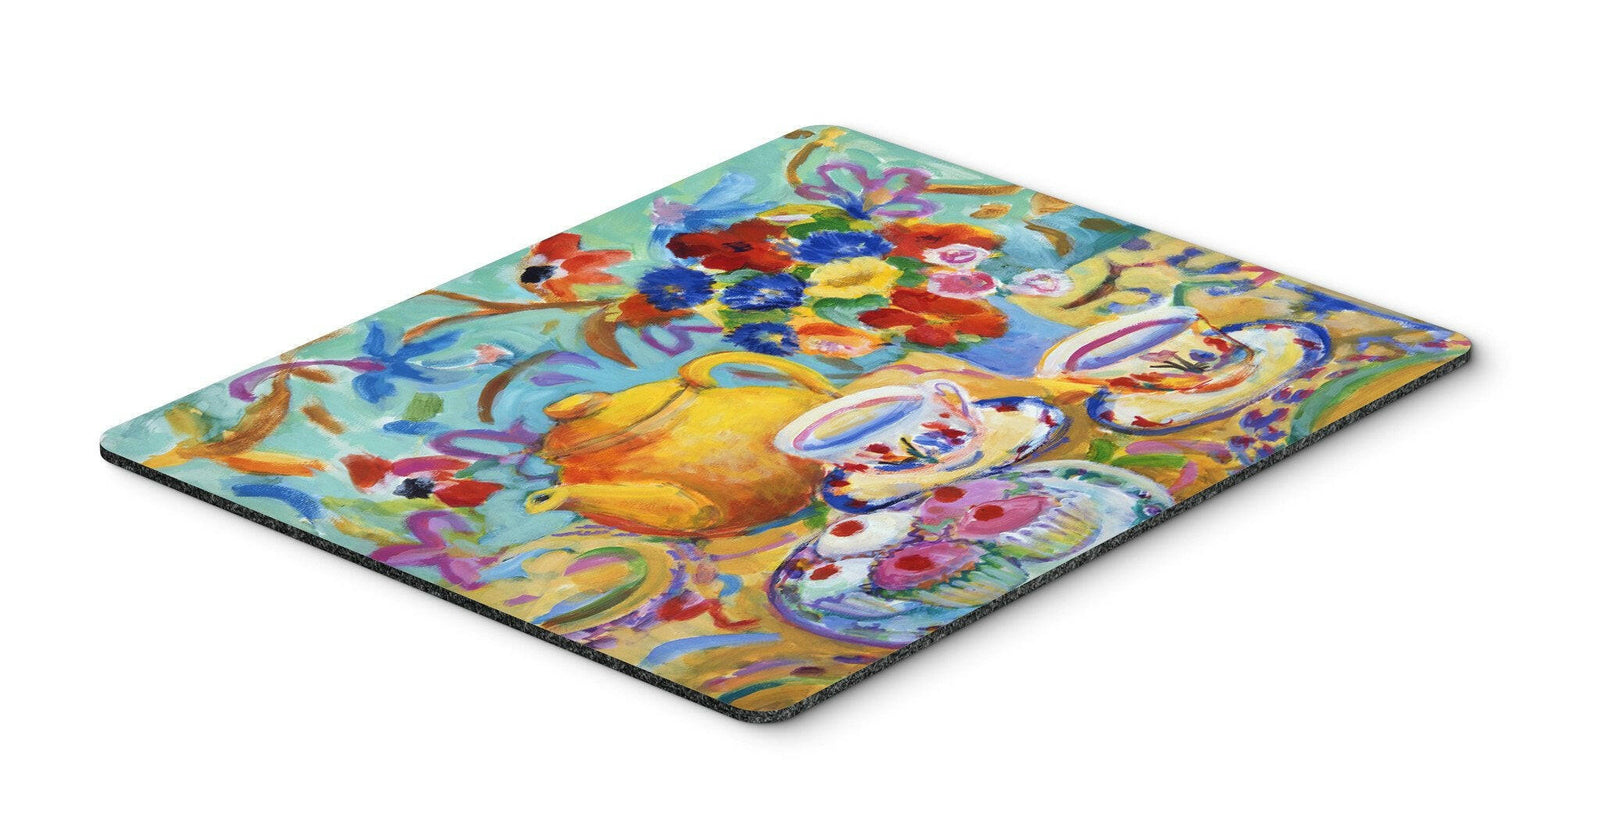 Teal Tea by Wendy Hoile Mouse Pad, Hot Pad or Trivet HWH0011MP by Caroline's Treasures